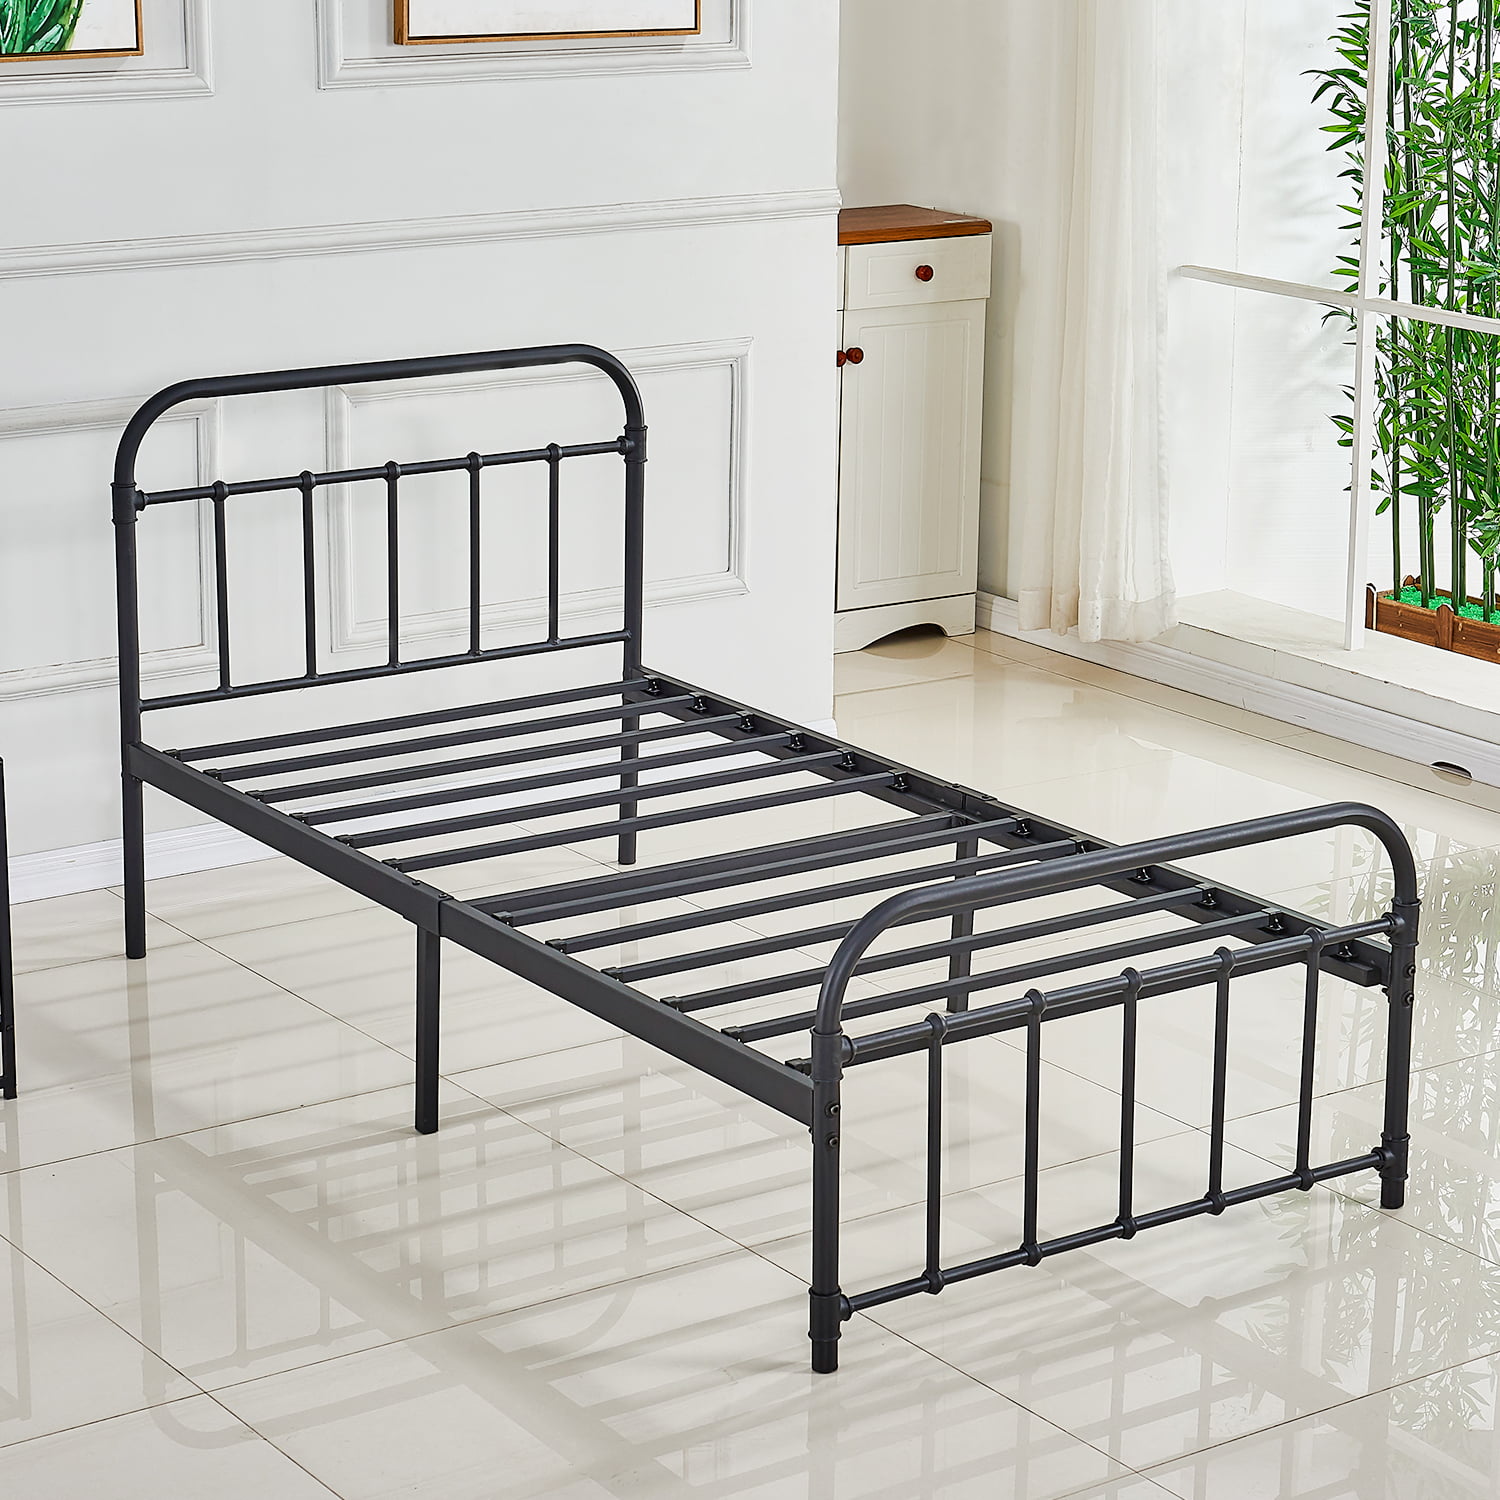 Dikapa Twin Size Bed Frame Base Metal, Bed Frame For Twin Size Bed